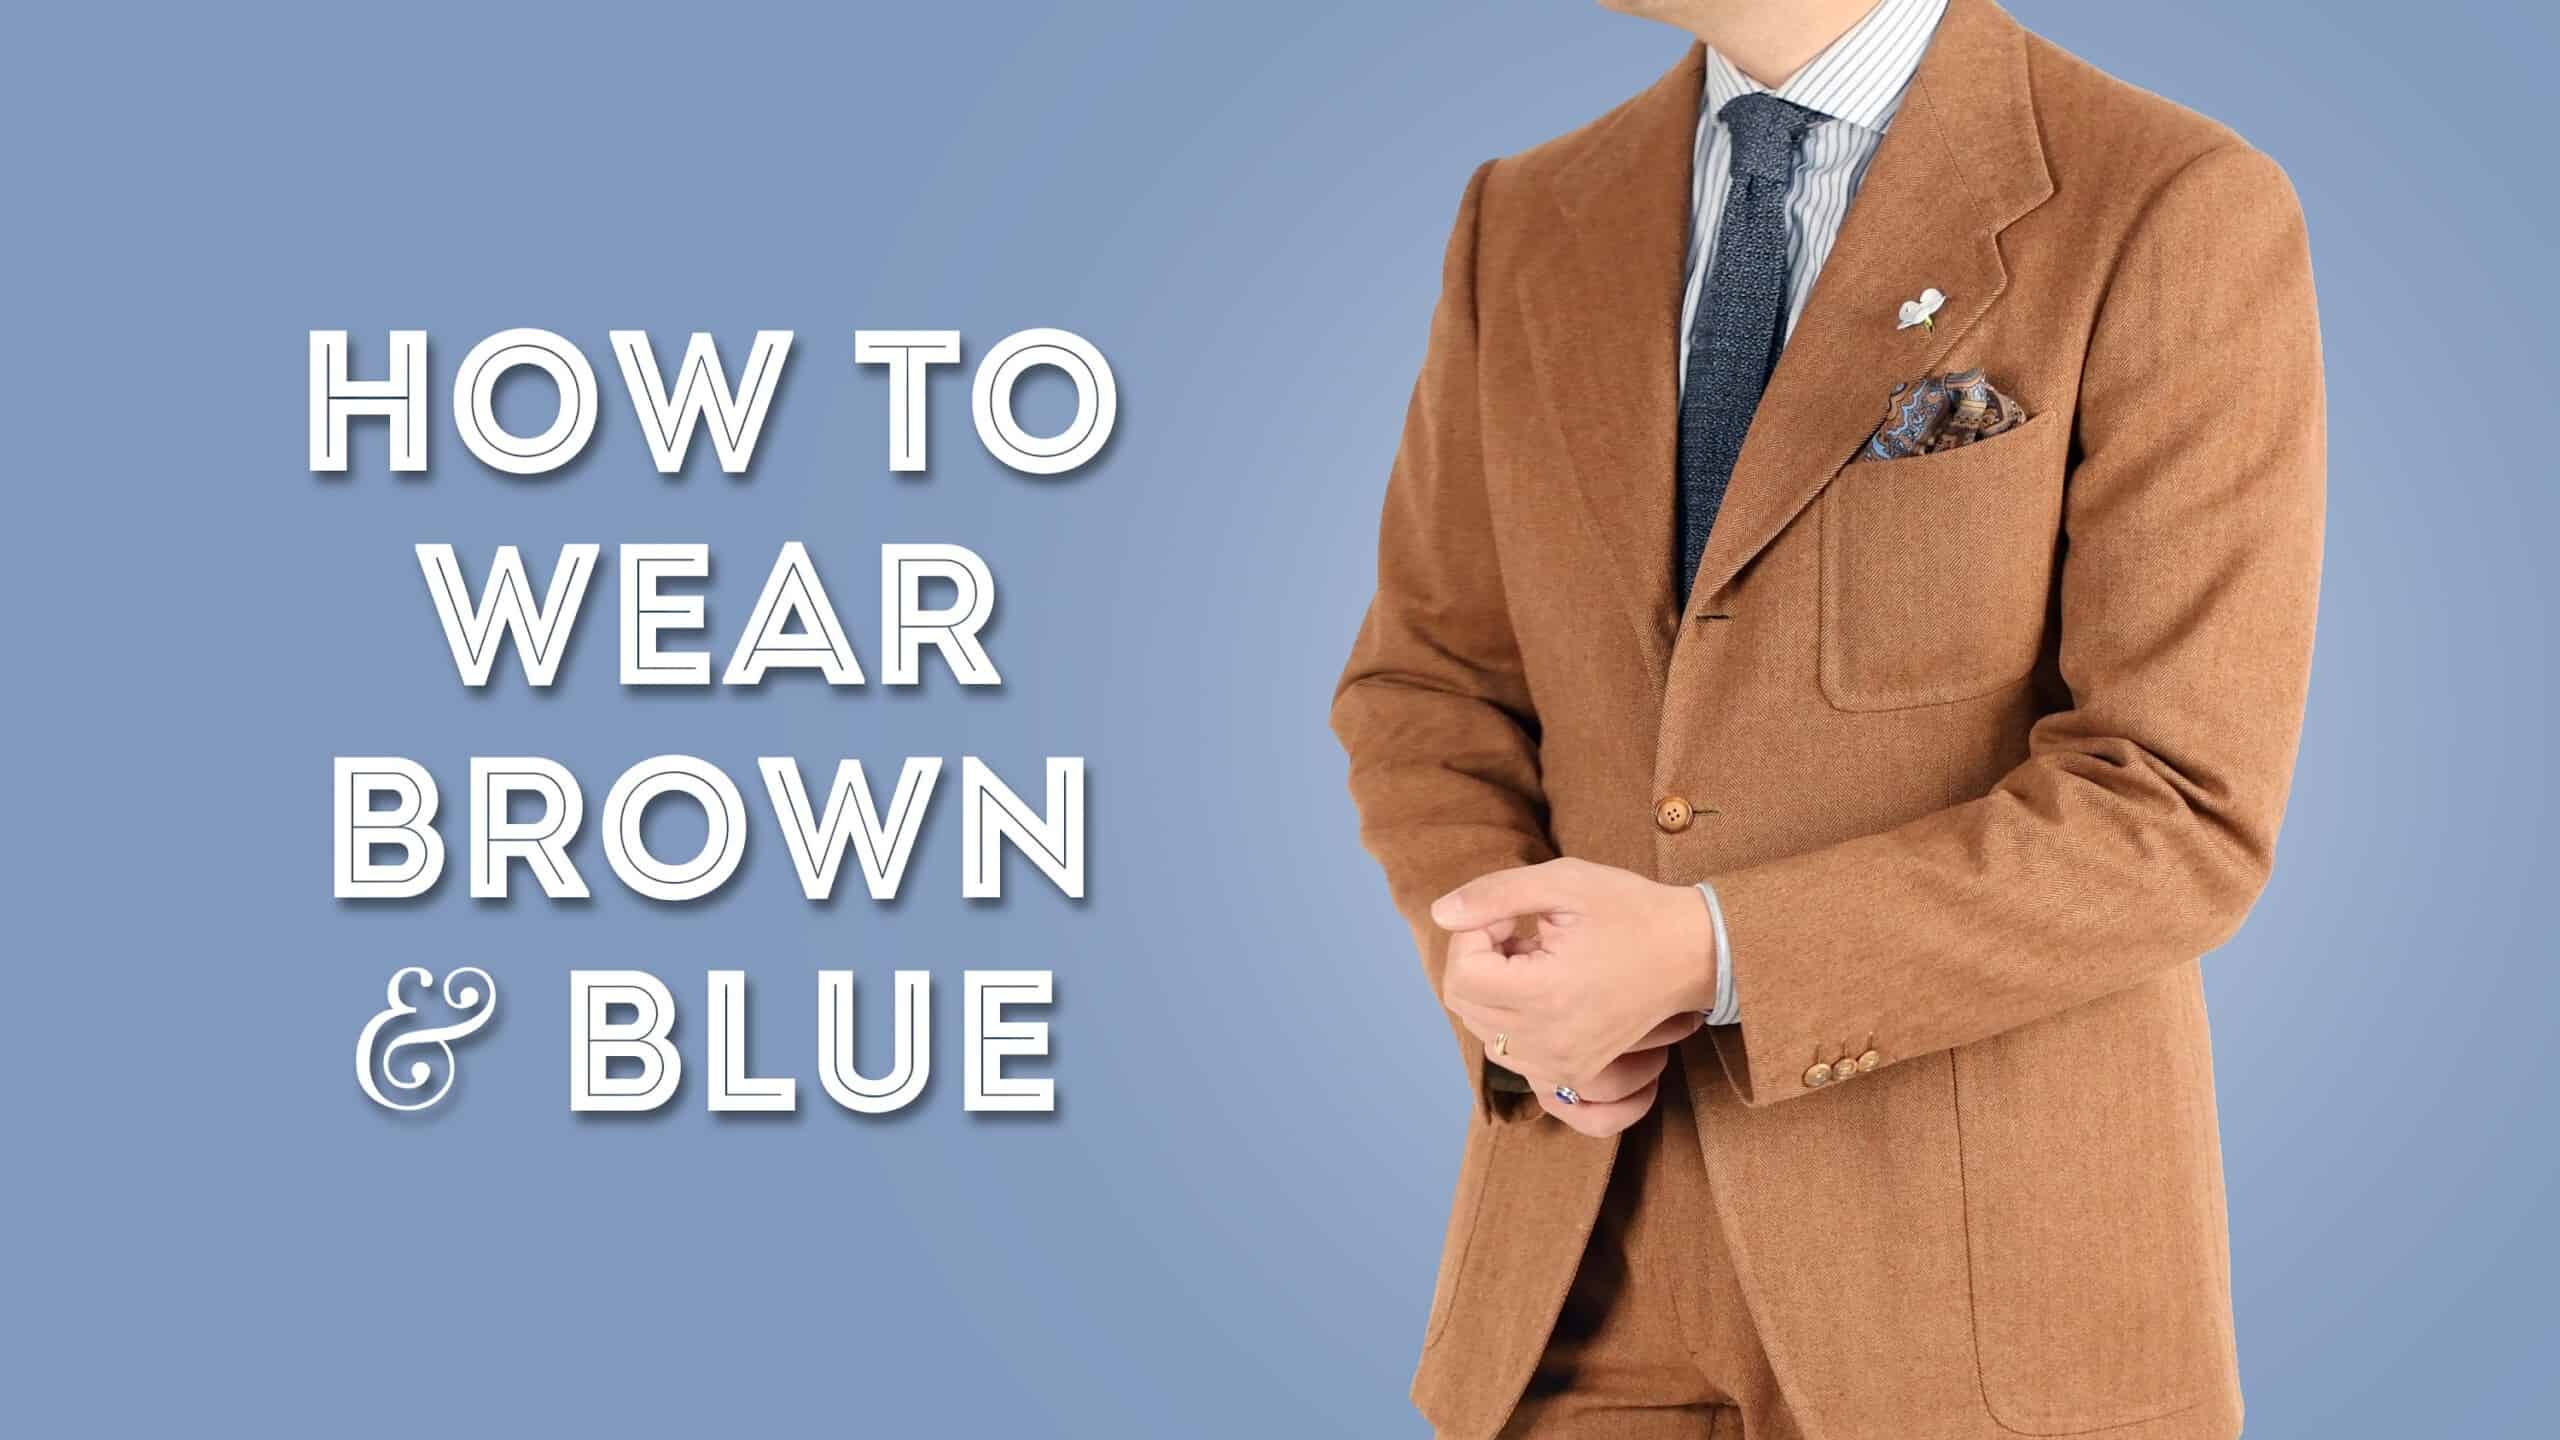 Broken suit how to mix separates and color combinations  Mismatched  suits jacket blazer pants and shirt pairing ideas